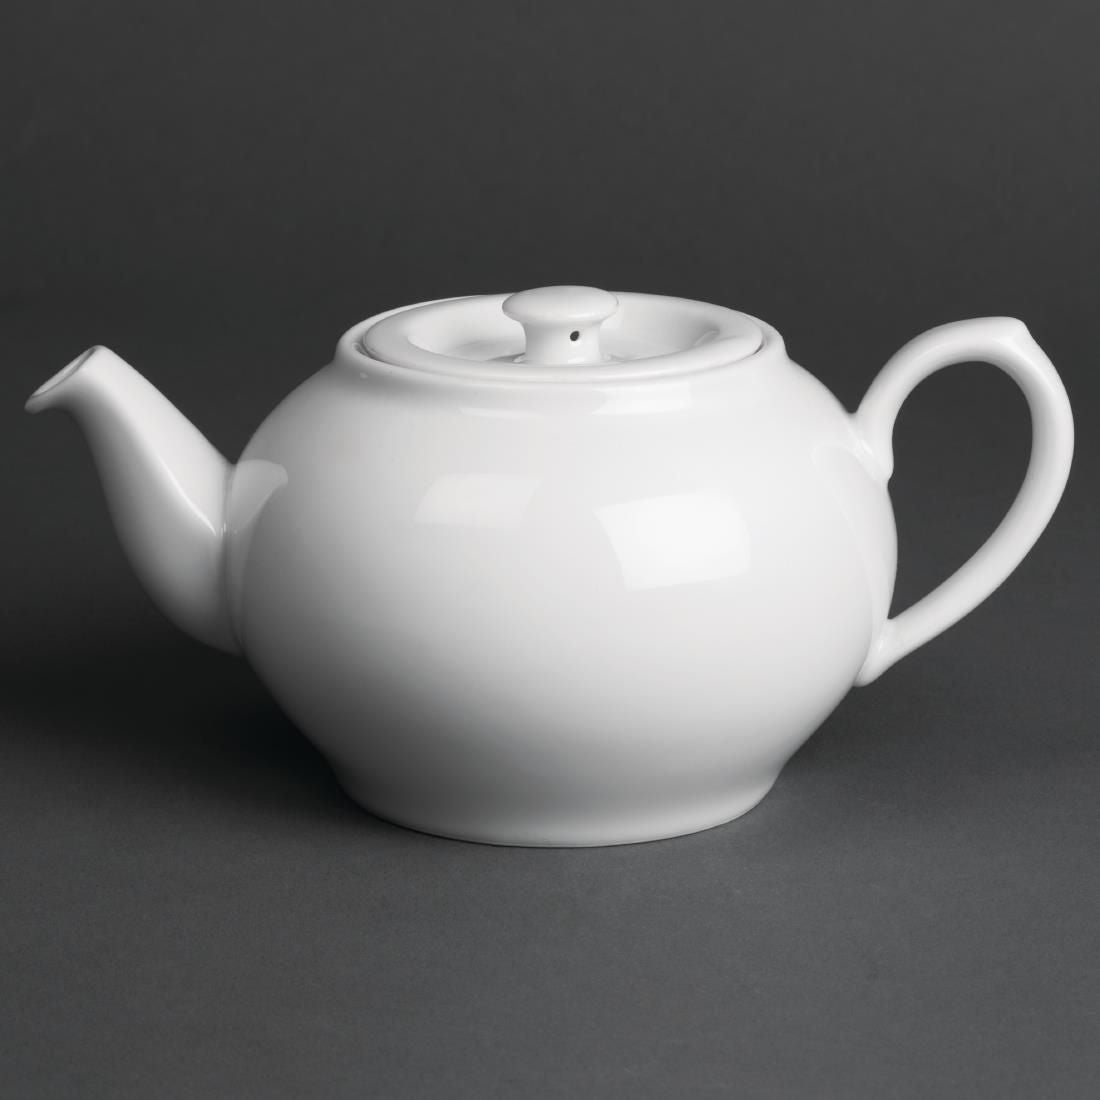 CG124 Royal Porcelain Oriental Teapots with Lids 600ml (Pack of 2)